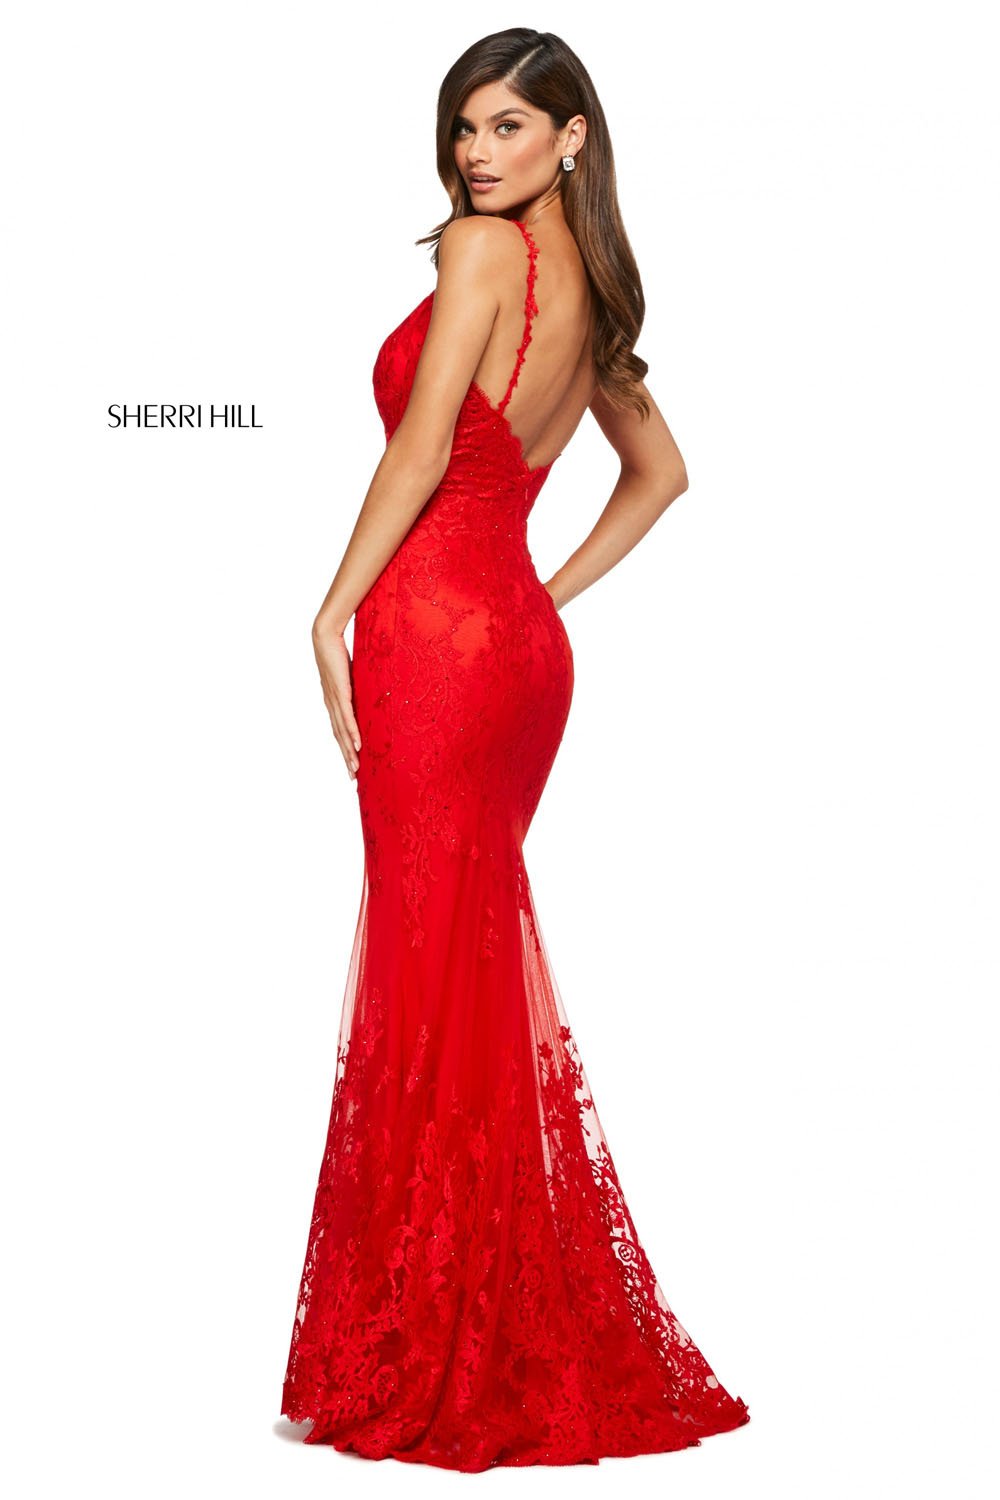 Sherri Hill 53530 dress images in these colors: Black, Red.